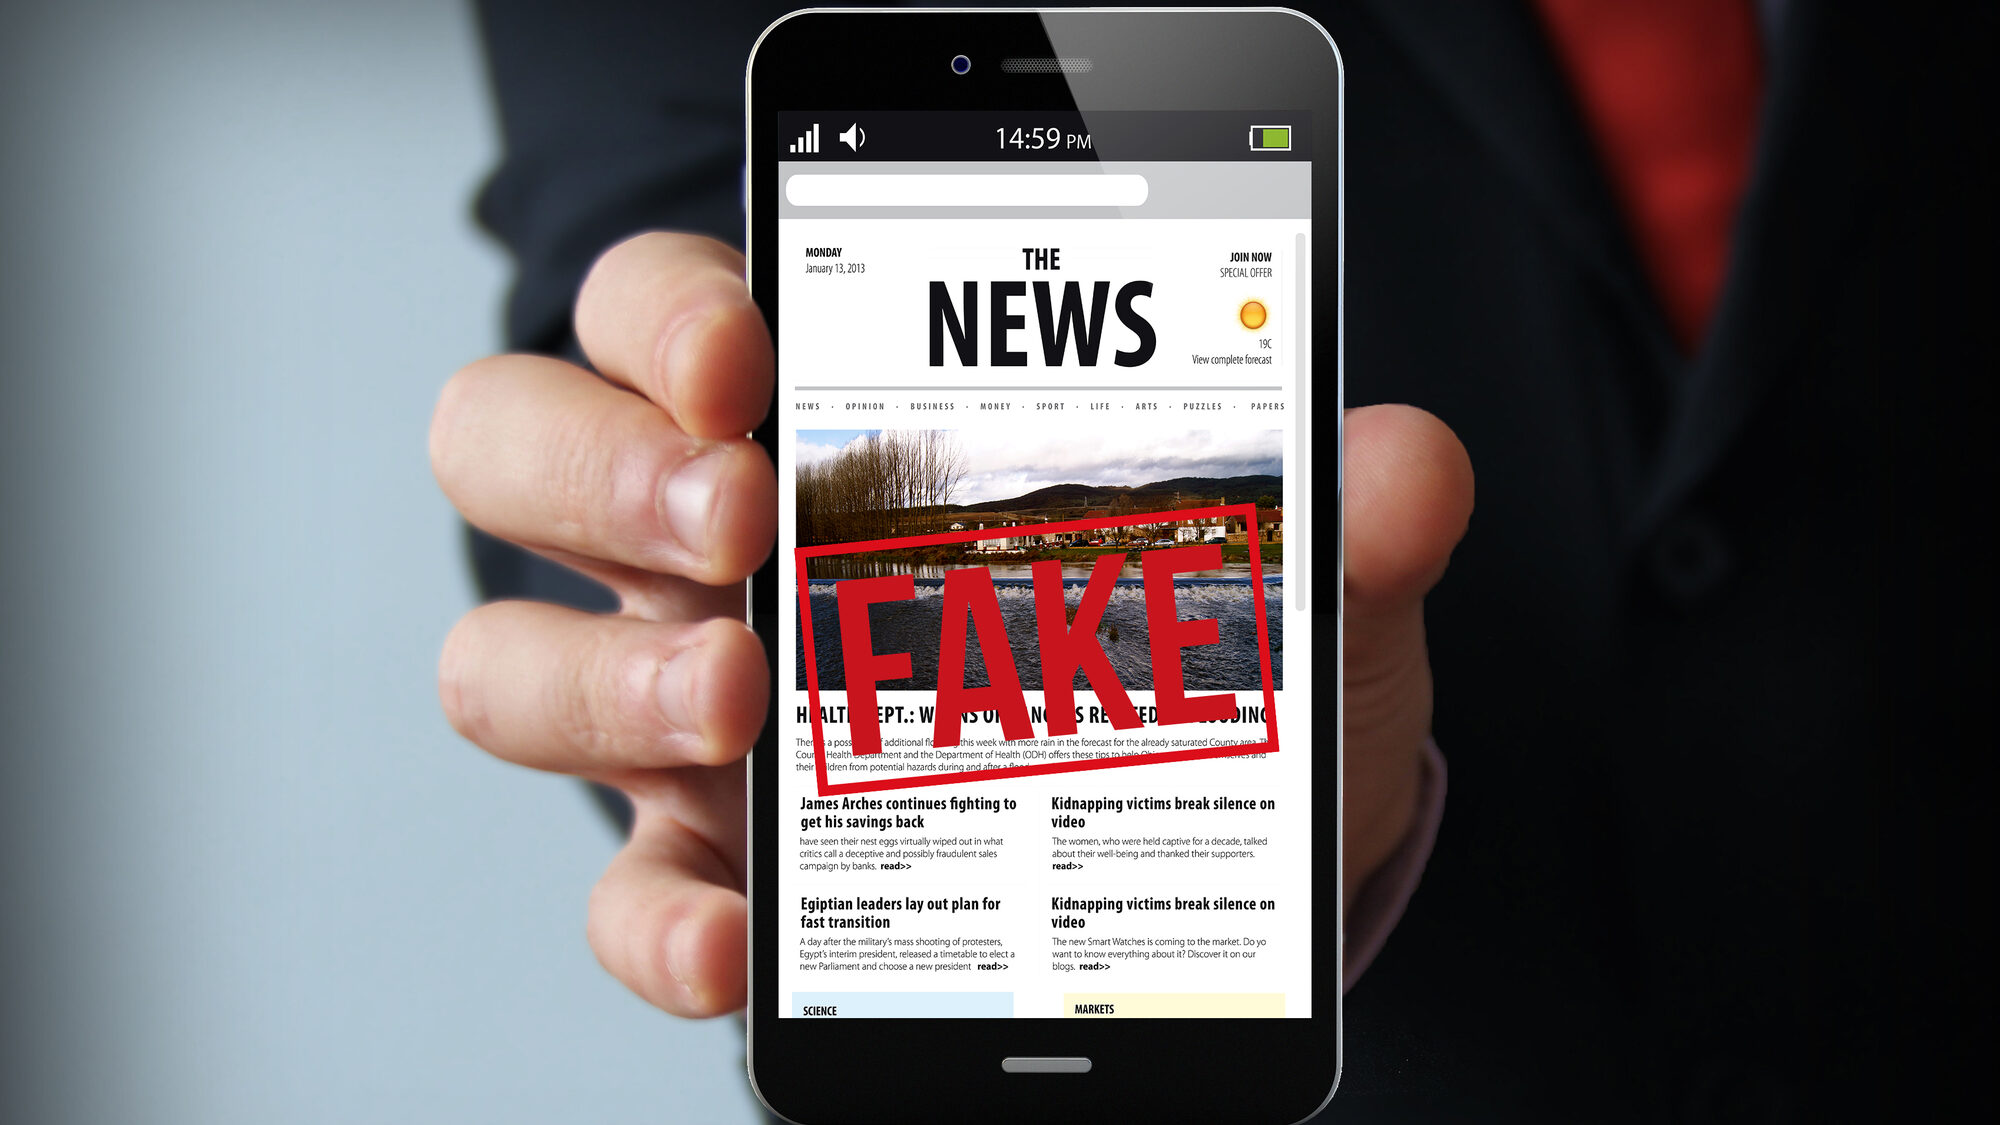 How older adults can learn to effectively spot fake news